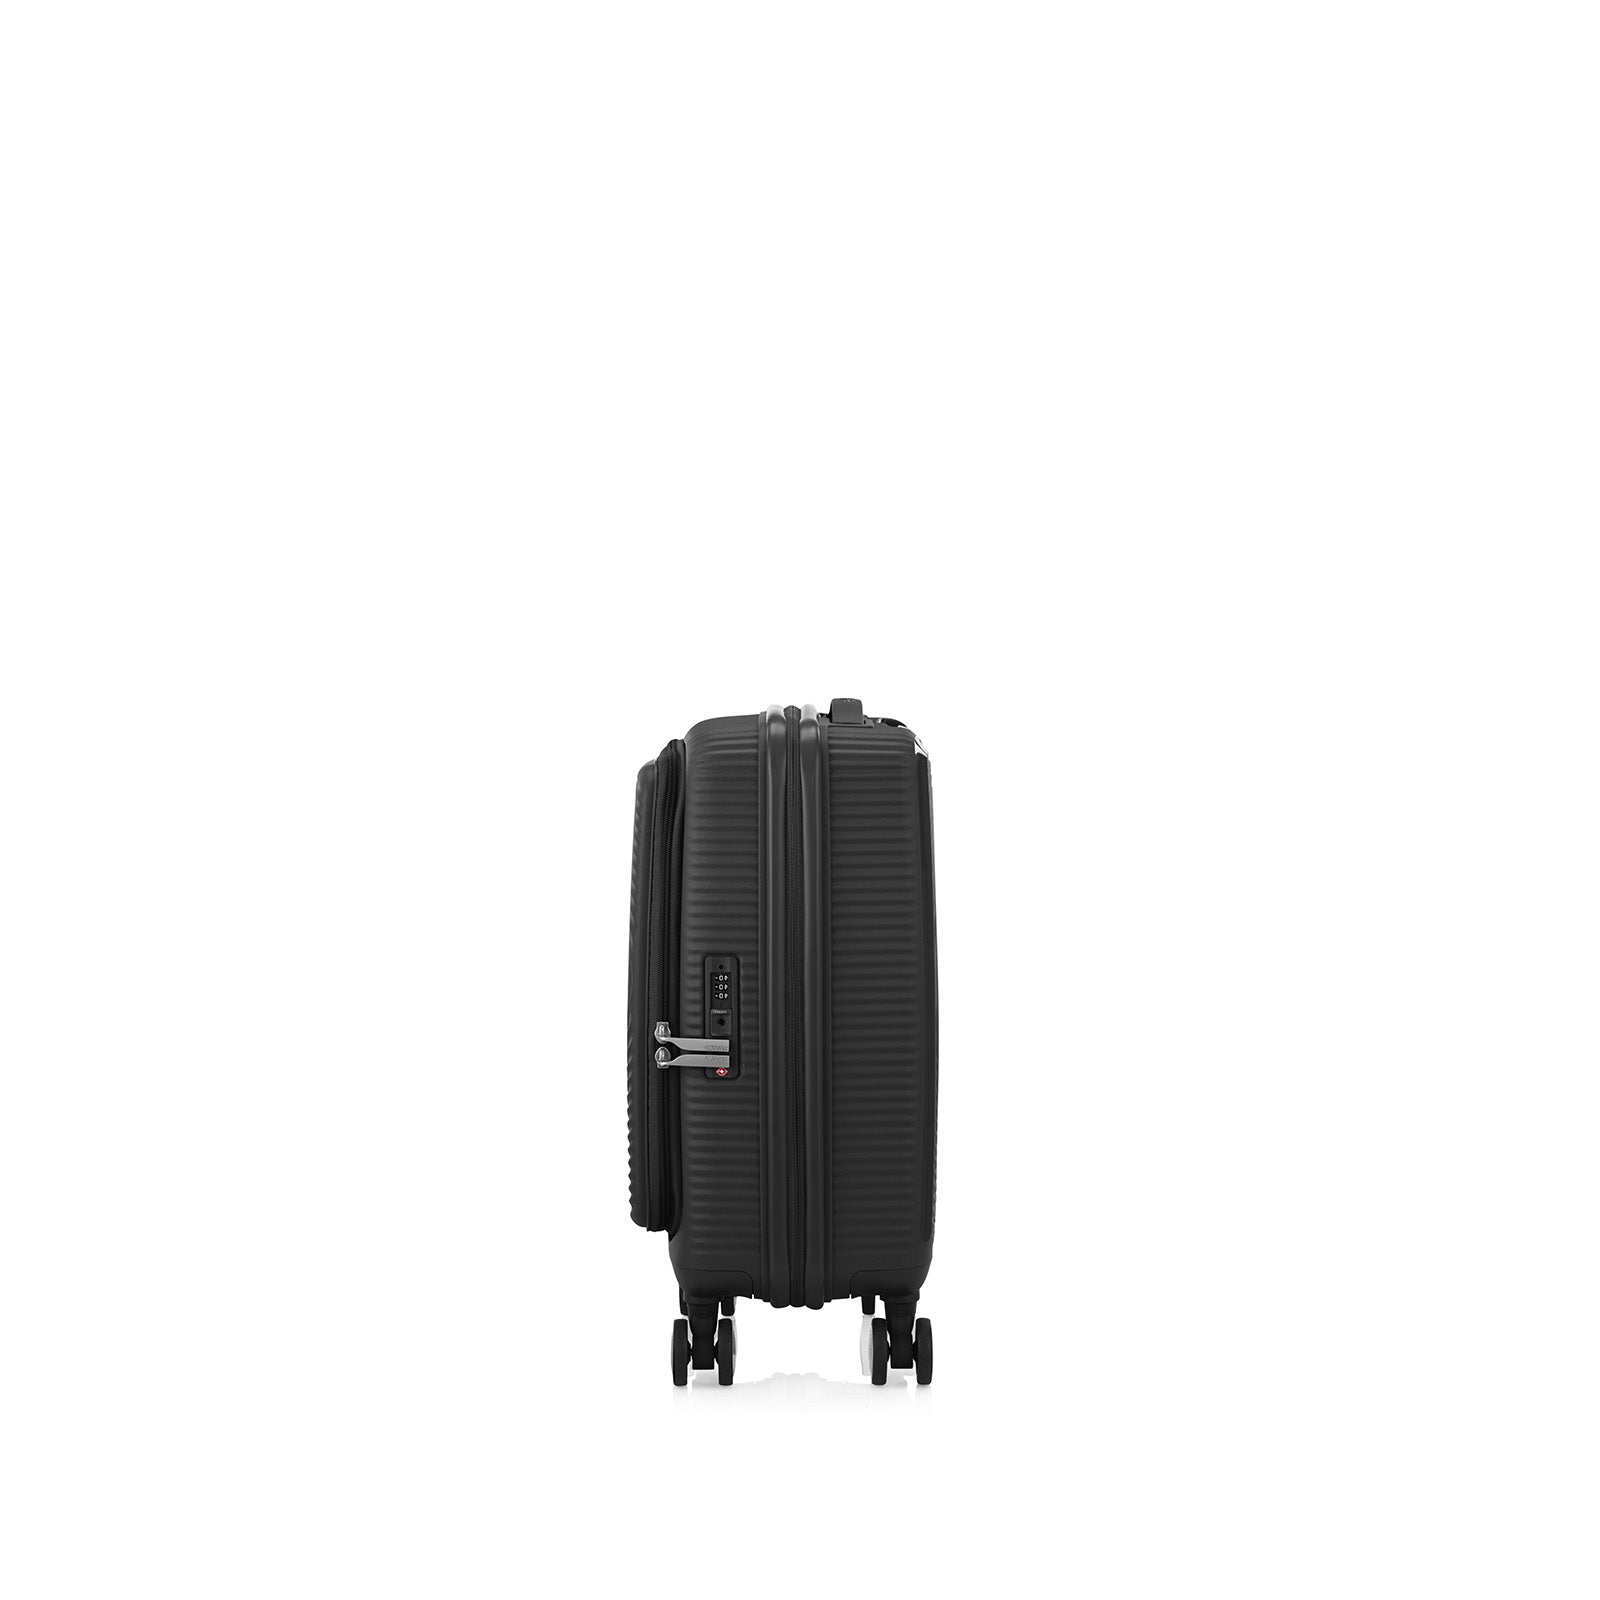 American-Tourister-Curio-Book-Opening-55cm-Carry-On-Suitcase-Black-Side-Lock